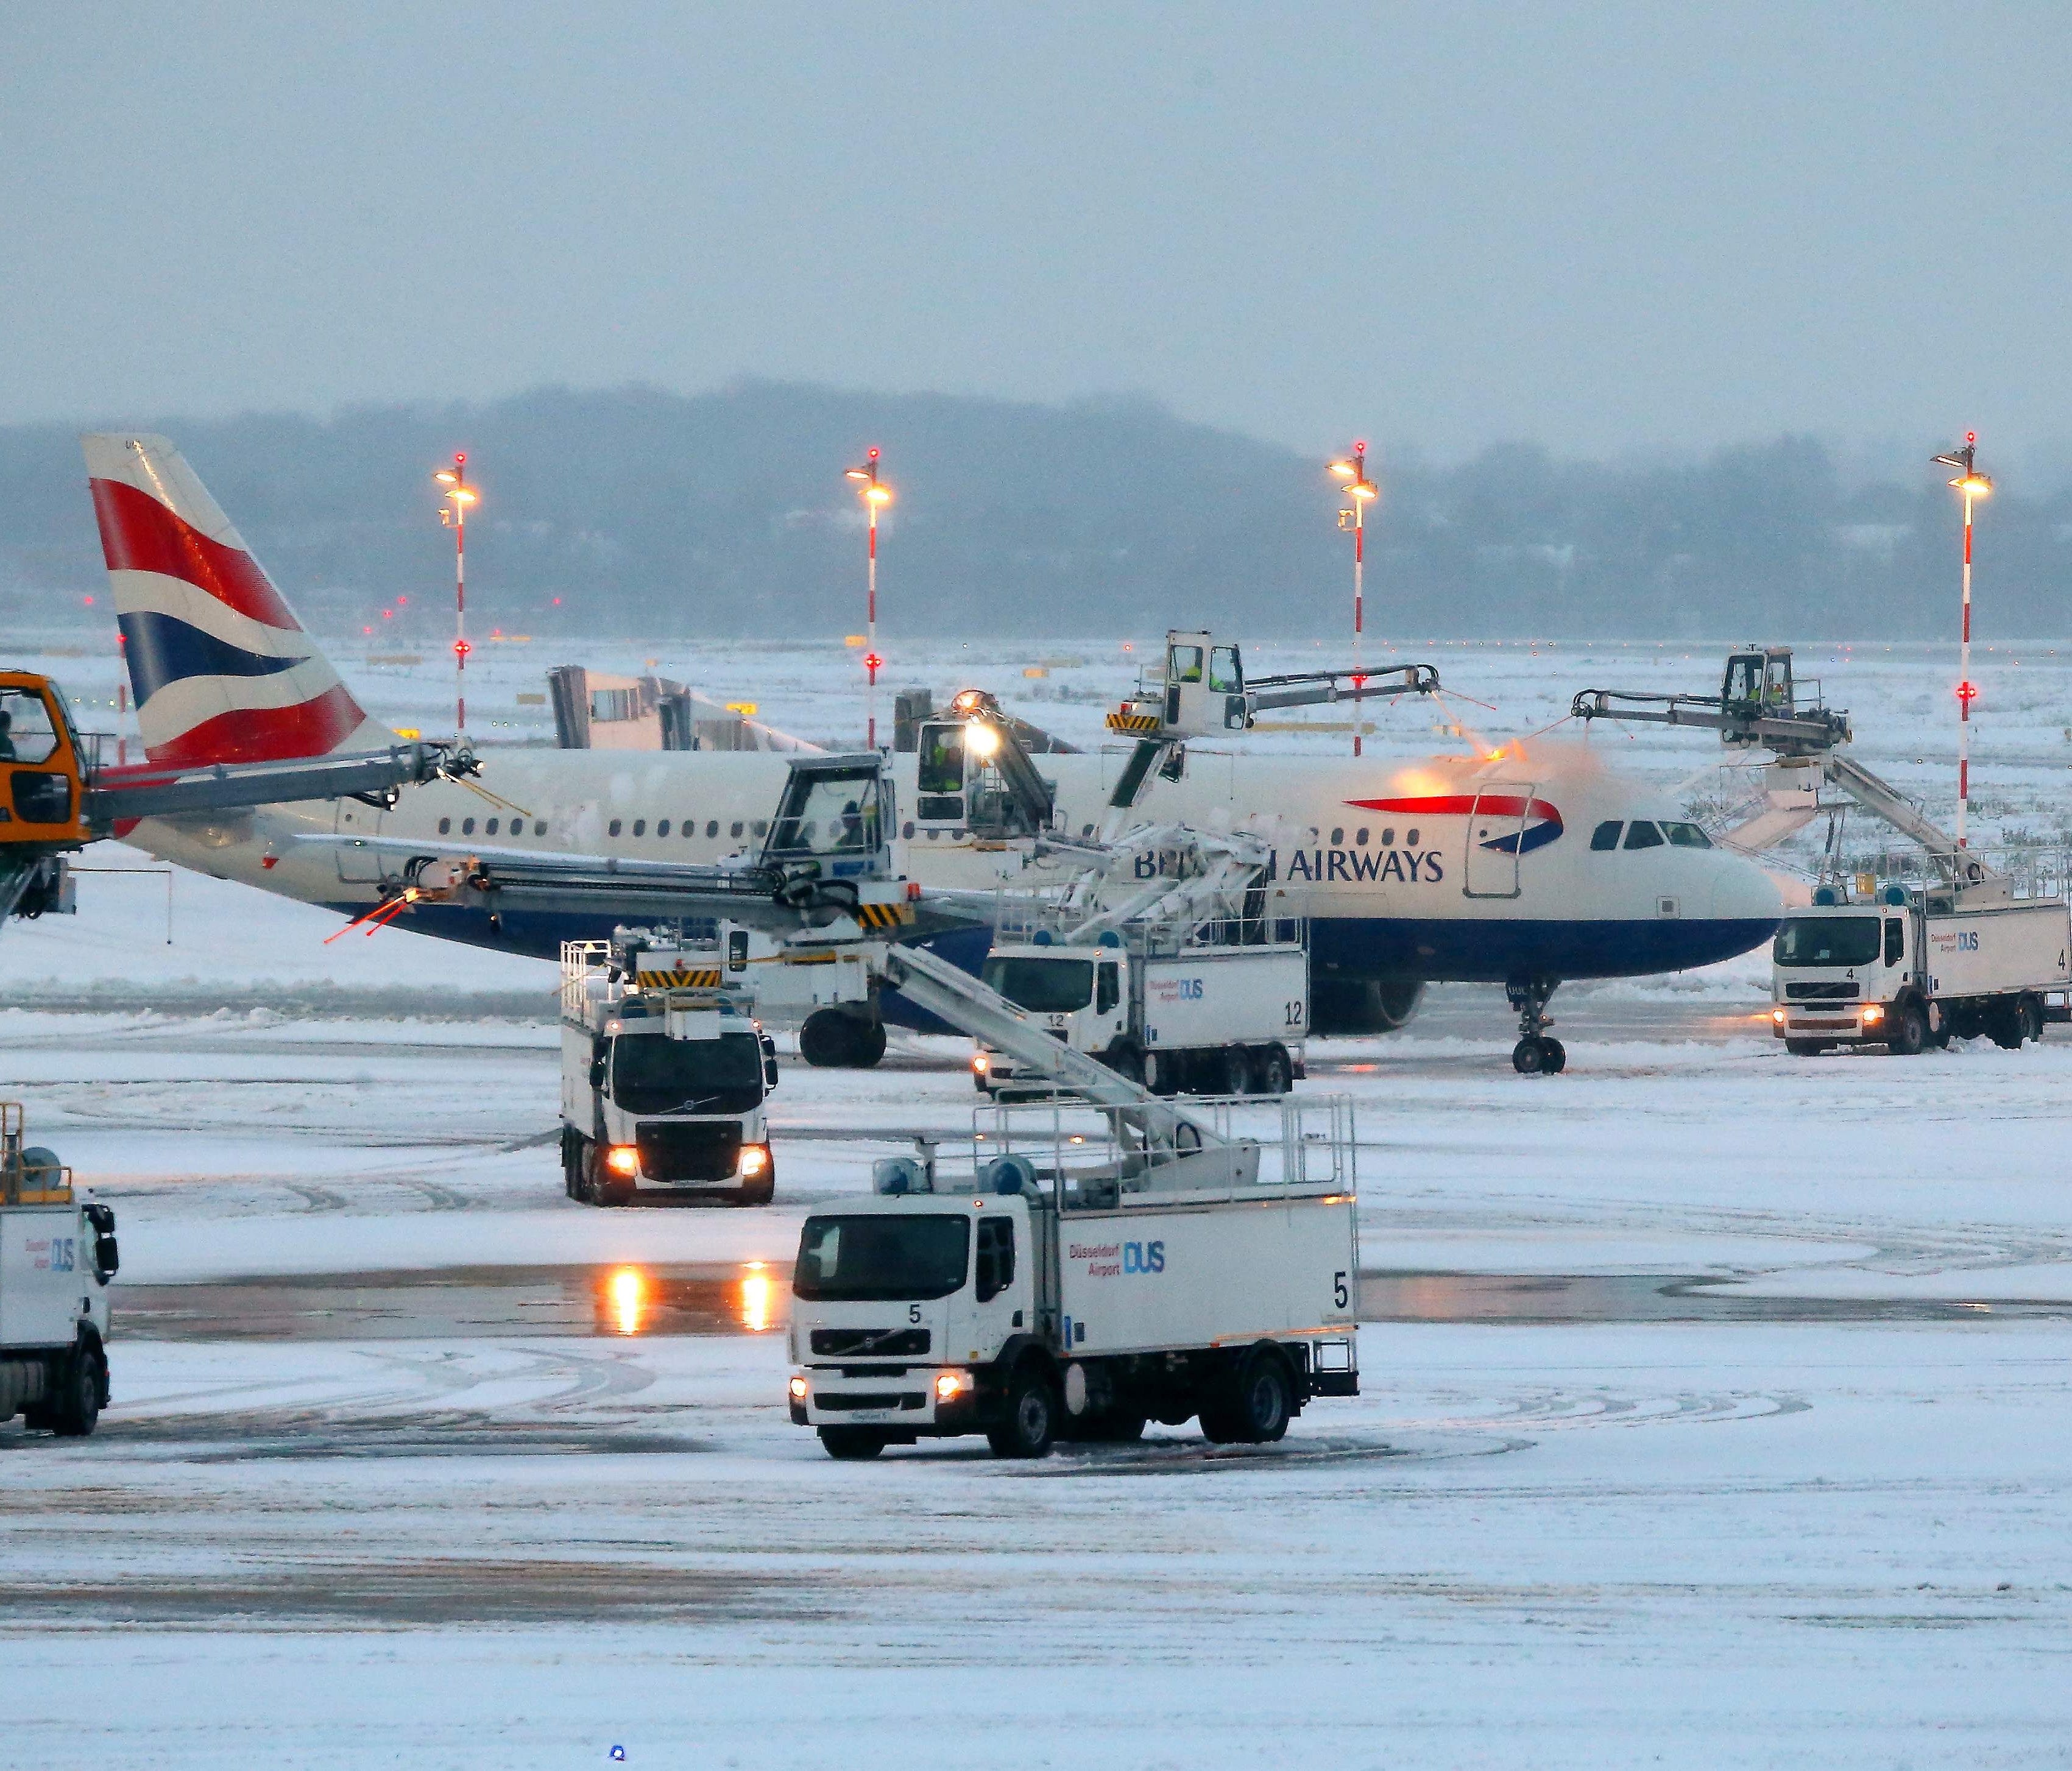 A British Airways jet is being de-iced at the airport in Dusseldorf, Germany, on Dec. 10, 2017.  Due to the weather conditions, Duesseldorf airport was forced to close for four hours during the afternoon, news agency DPA reported. / AFP PHOTO / dpa / 